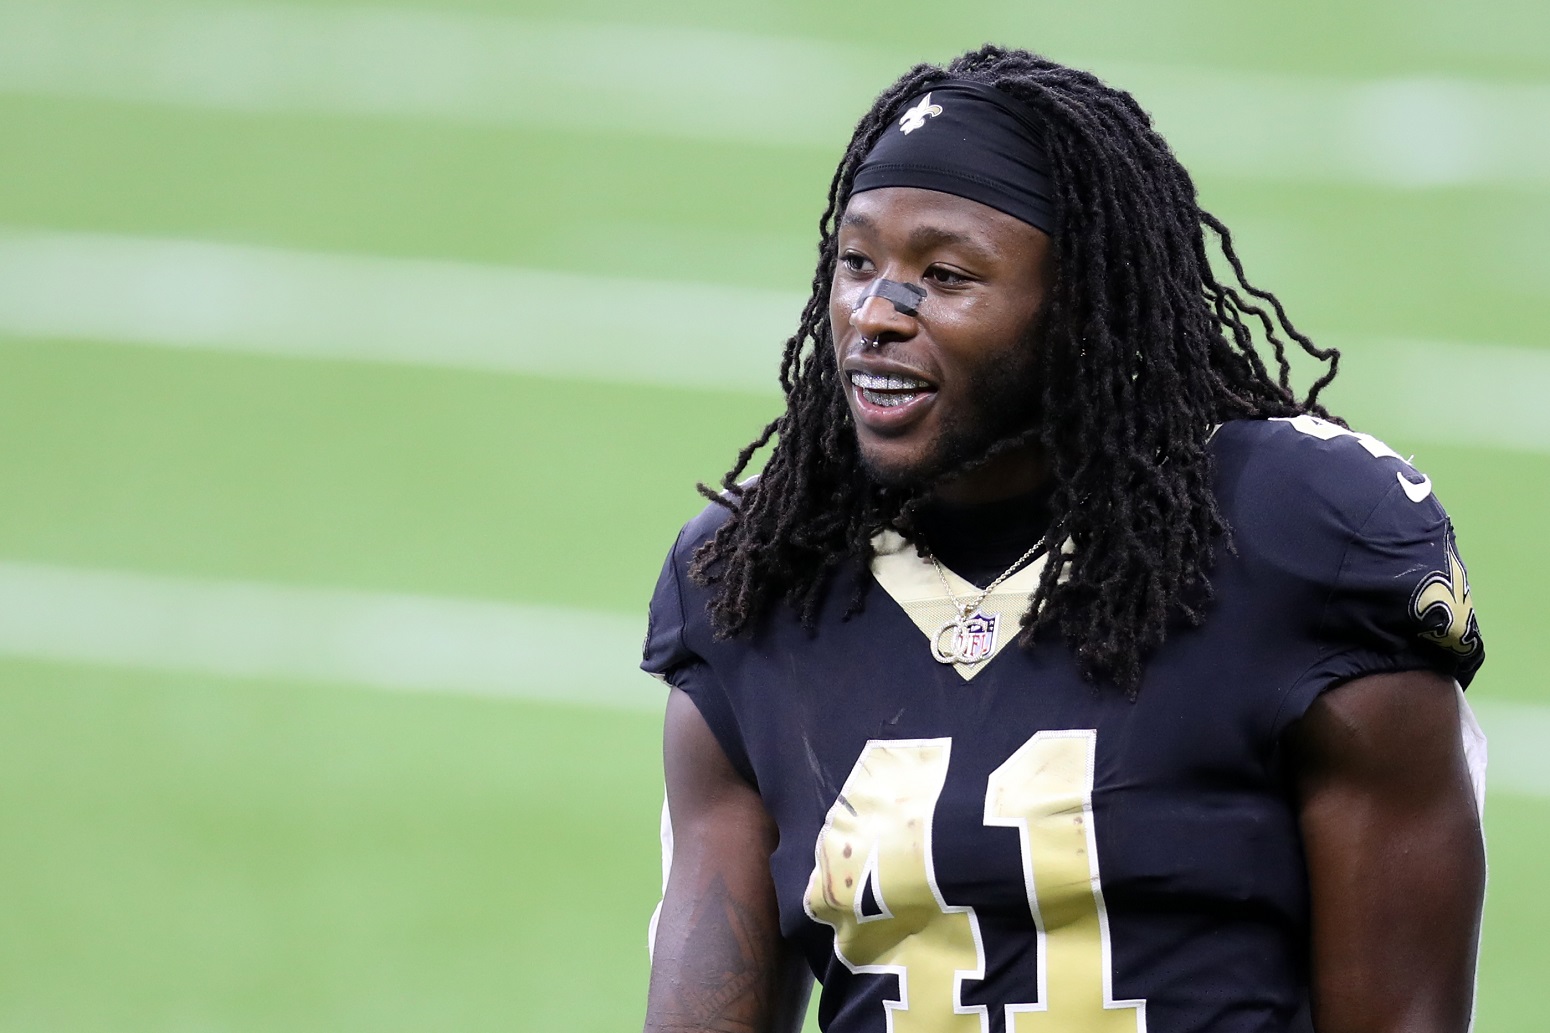 The Saints Are Going All In On Technology to Prepare Alvin Kamara to Play the Bears